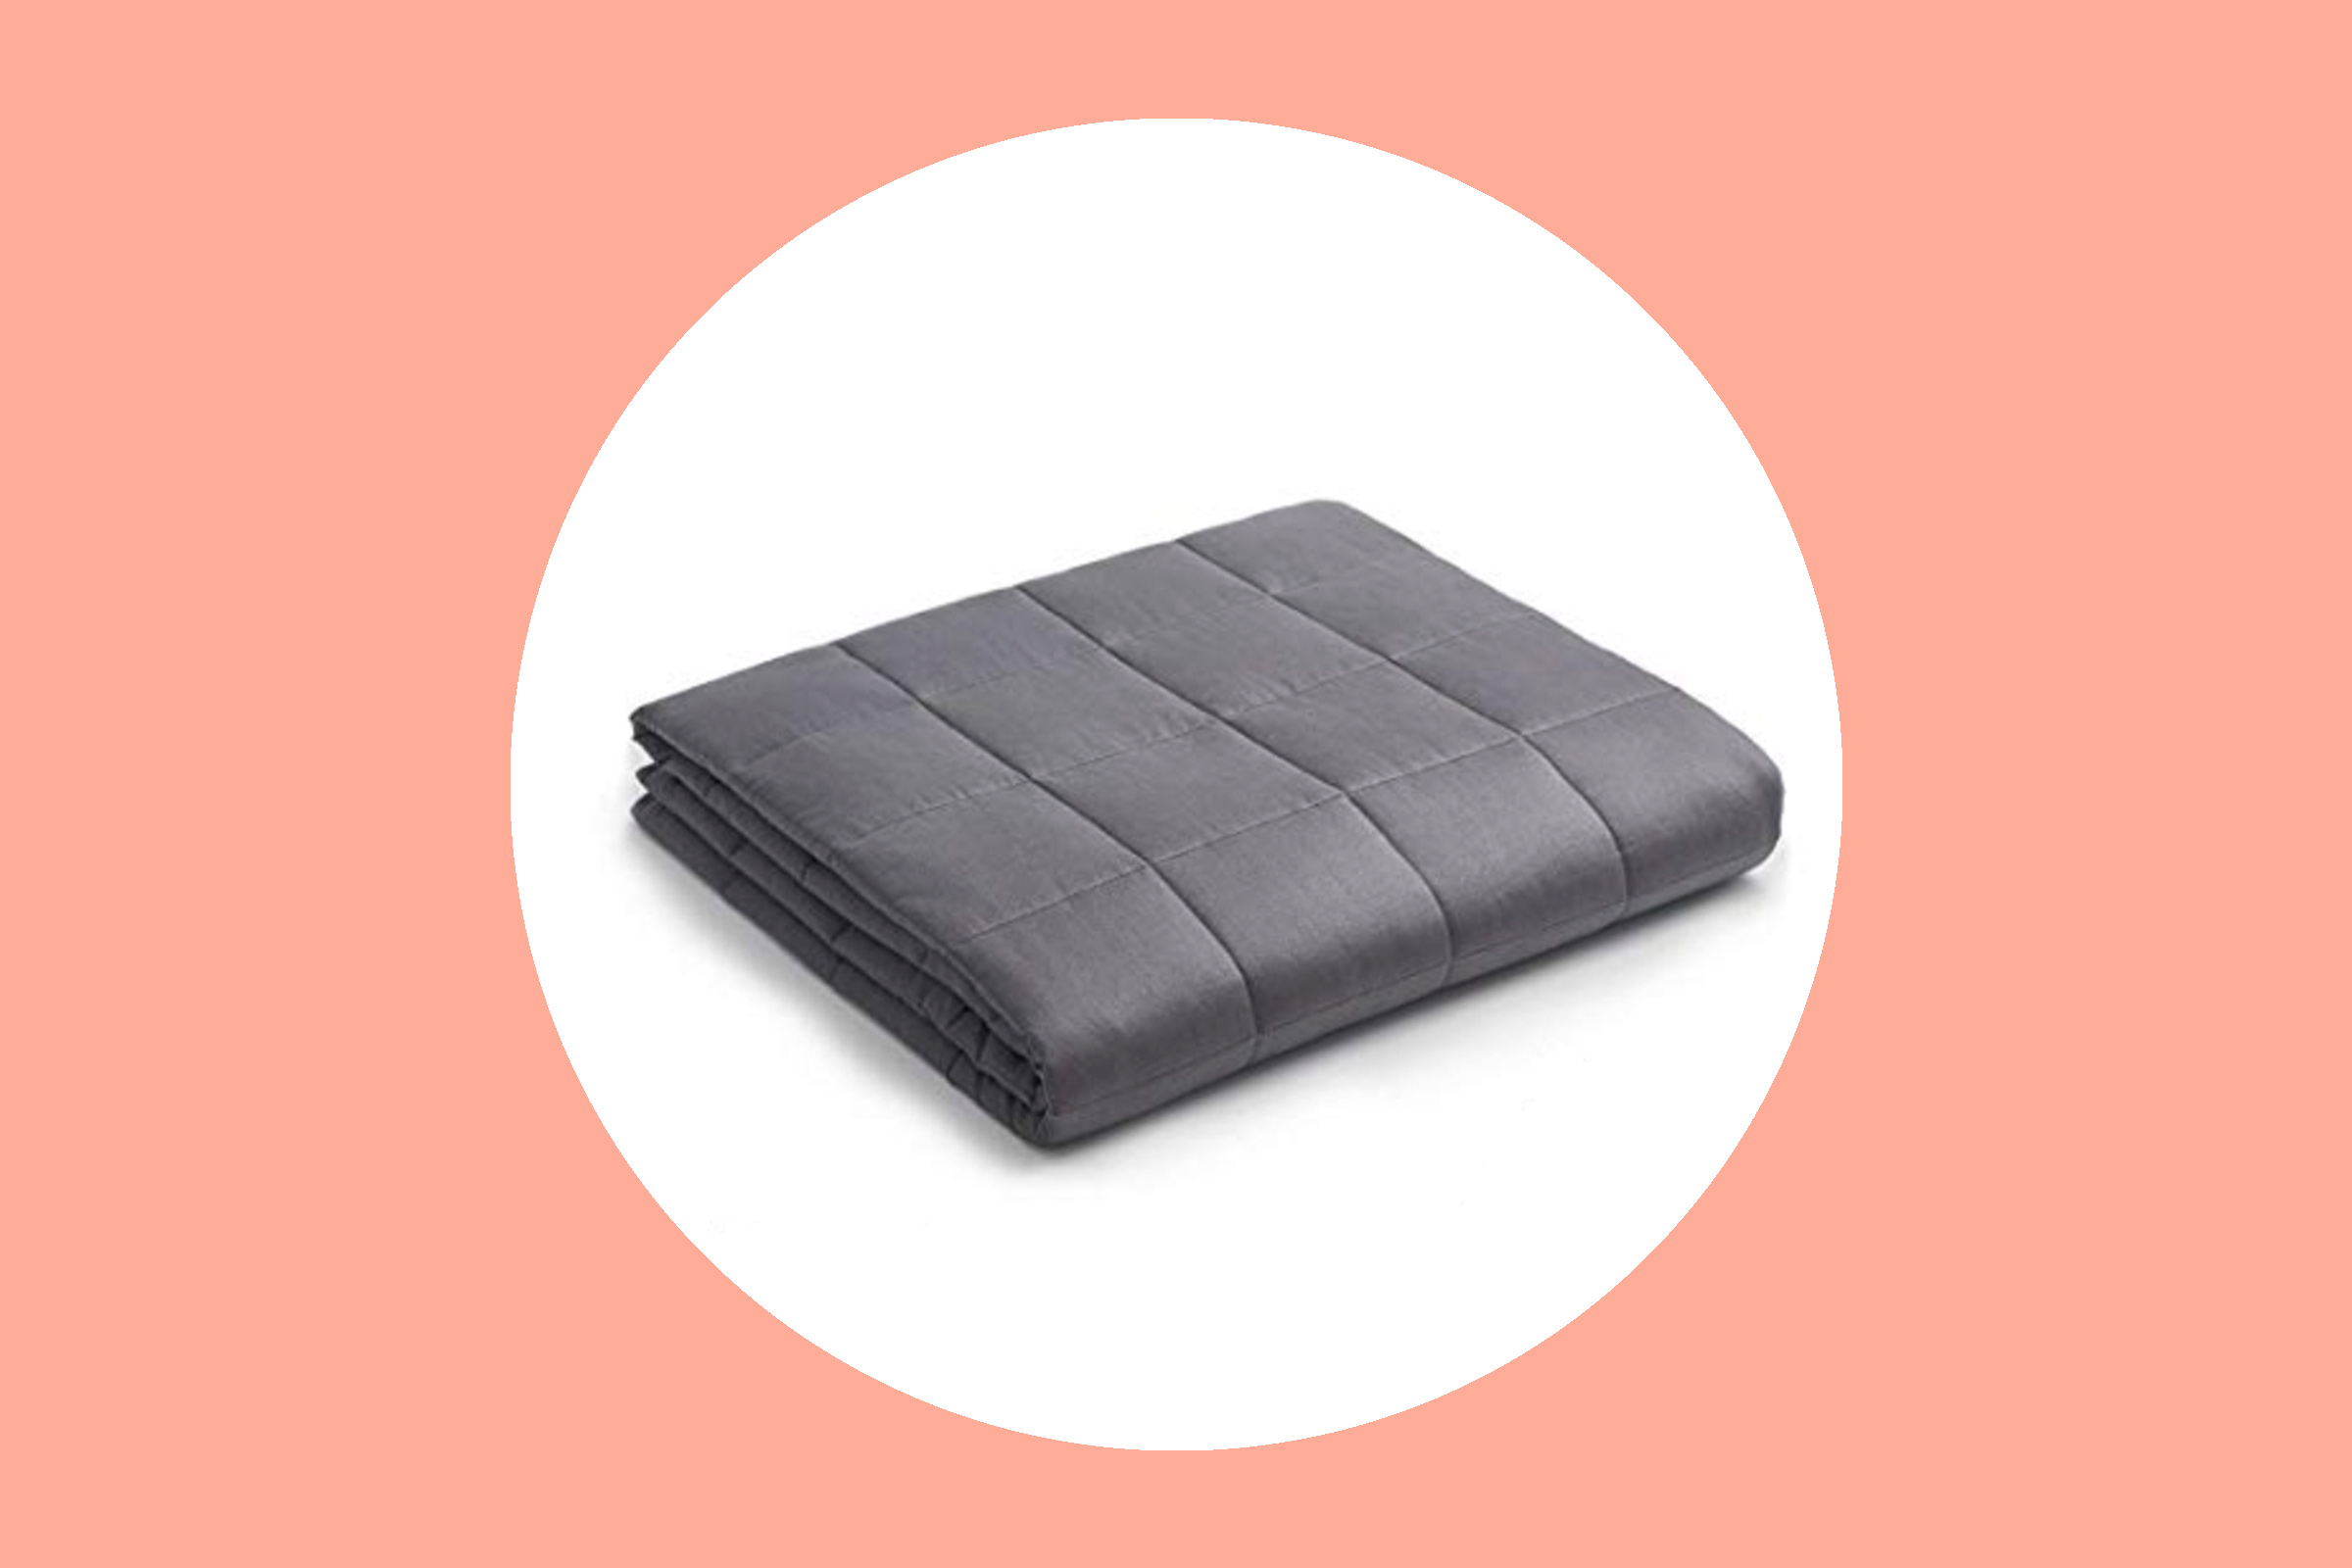 http://creakyjoints.org//wp-content/uploads/2019/11/1119_Arthritis_Gifts_Weighted_Blanket.jpg